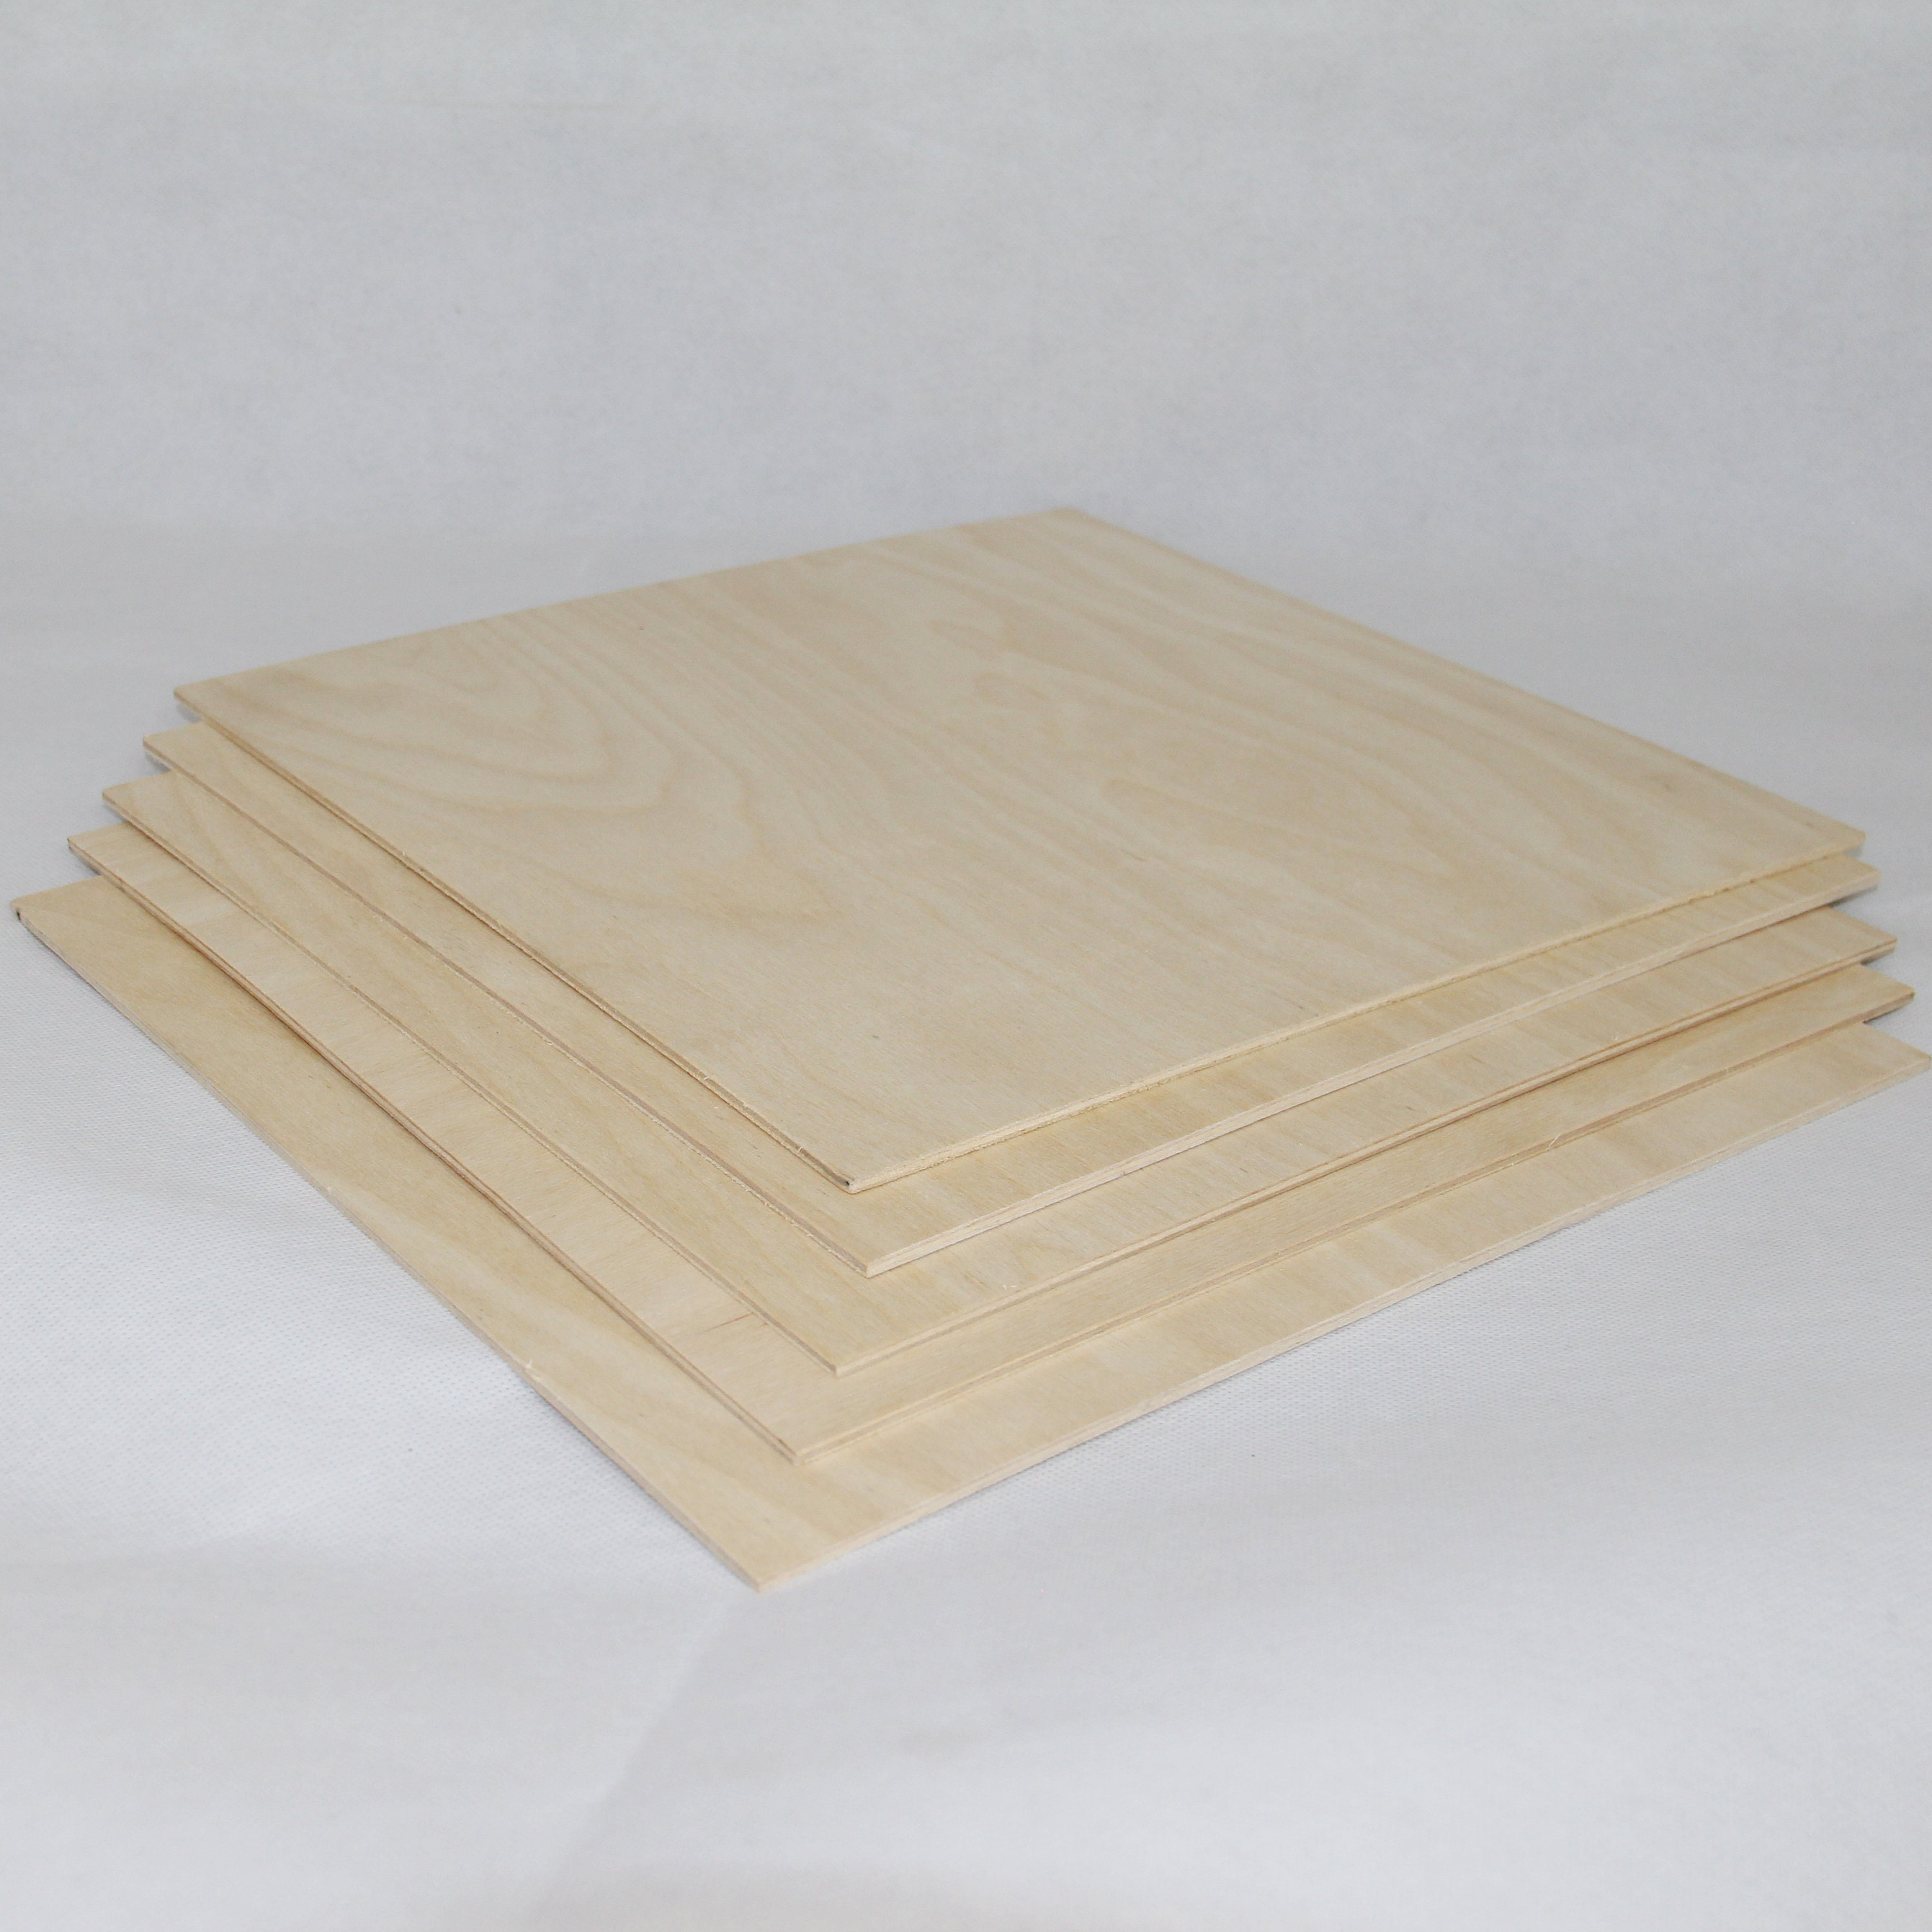 Basswood Laser Plywood 1/4, 12x18 Inch Sheets, 6mm Laser Wood, CNC Laser  Material, Glowforge Ready Wood Sheets, Laser Ready Supplies 